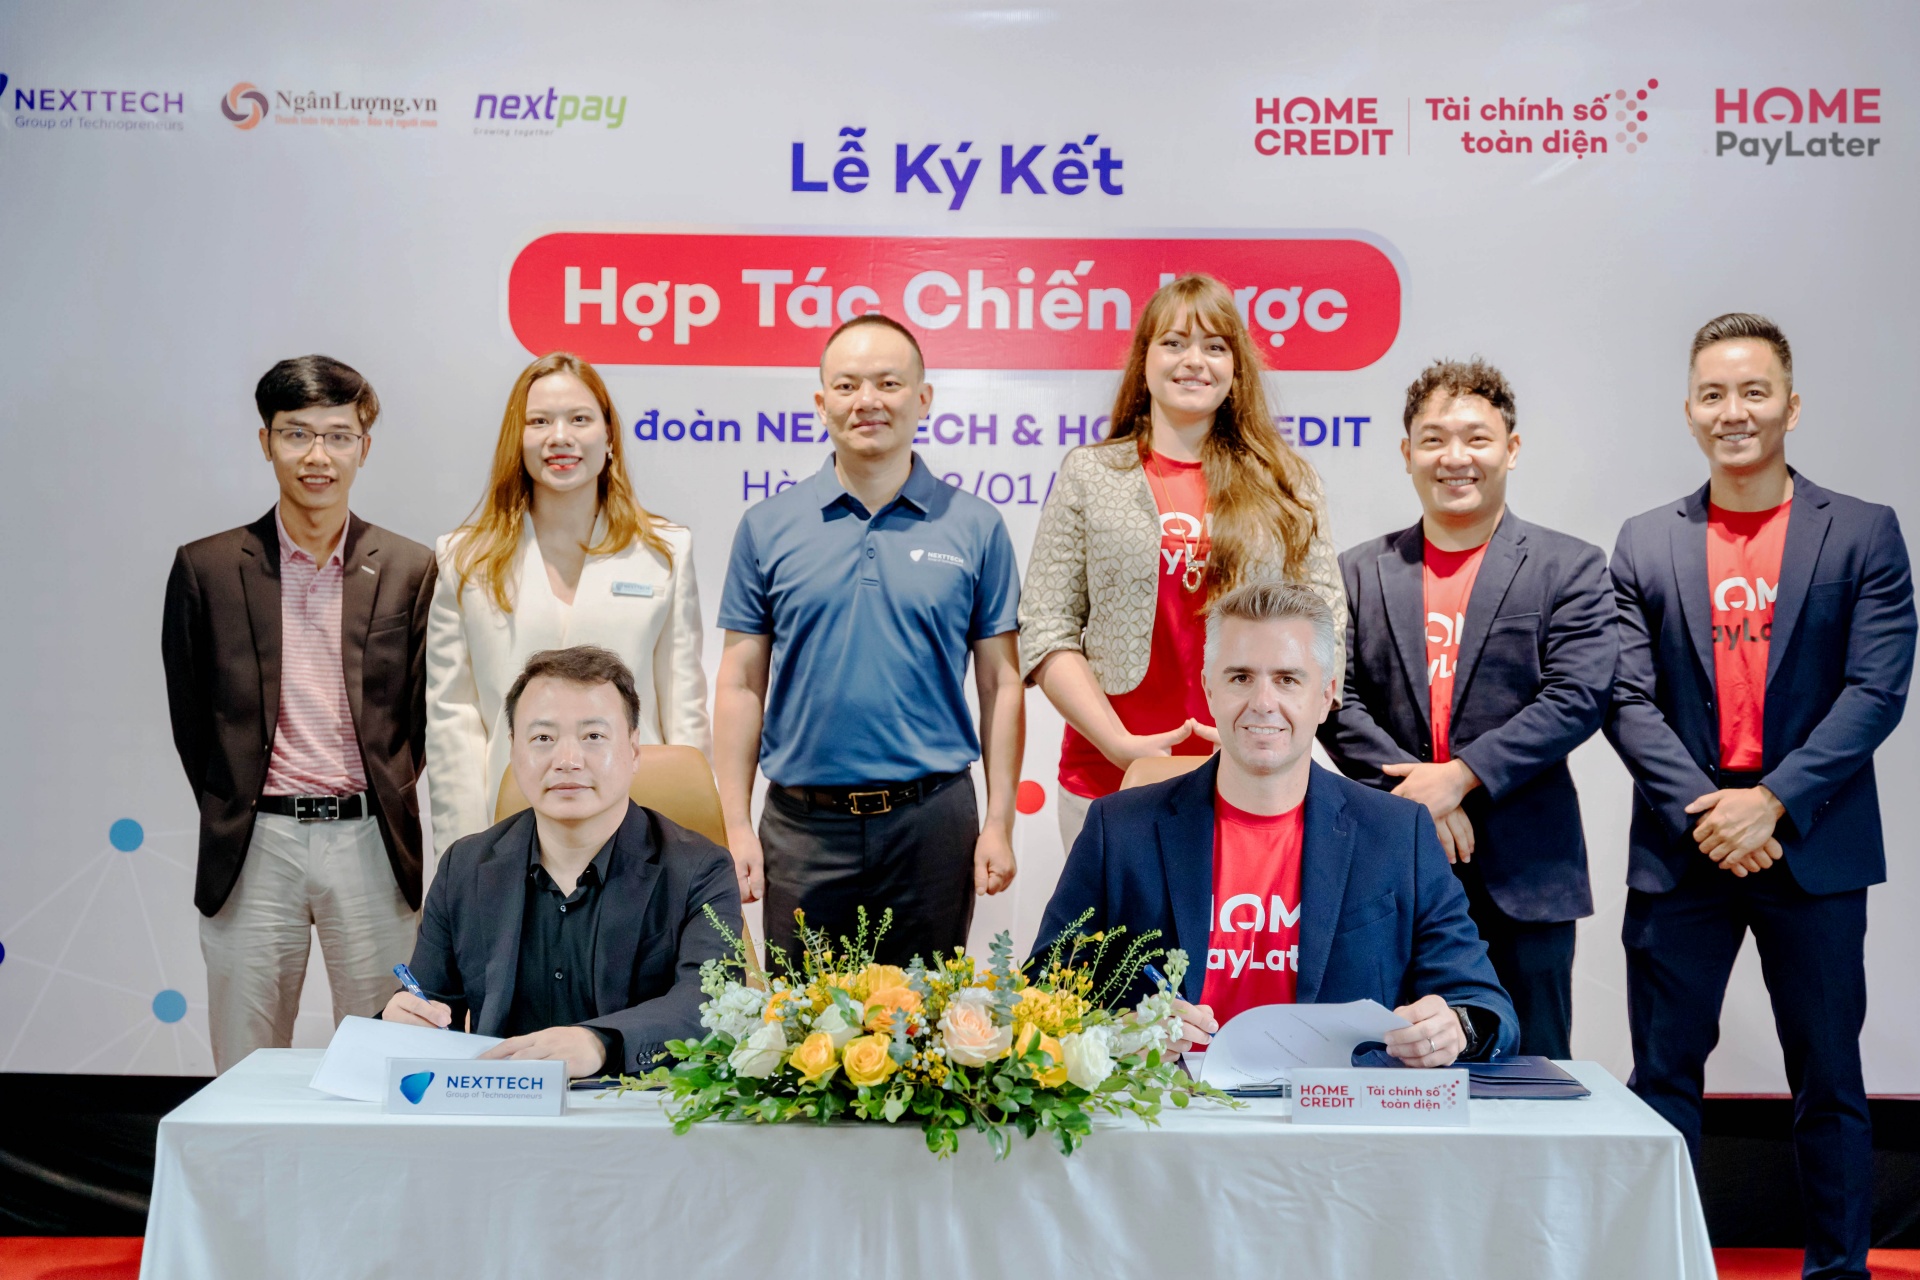 home credit and nexttech sign agreement on buy now pay later project